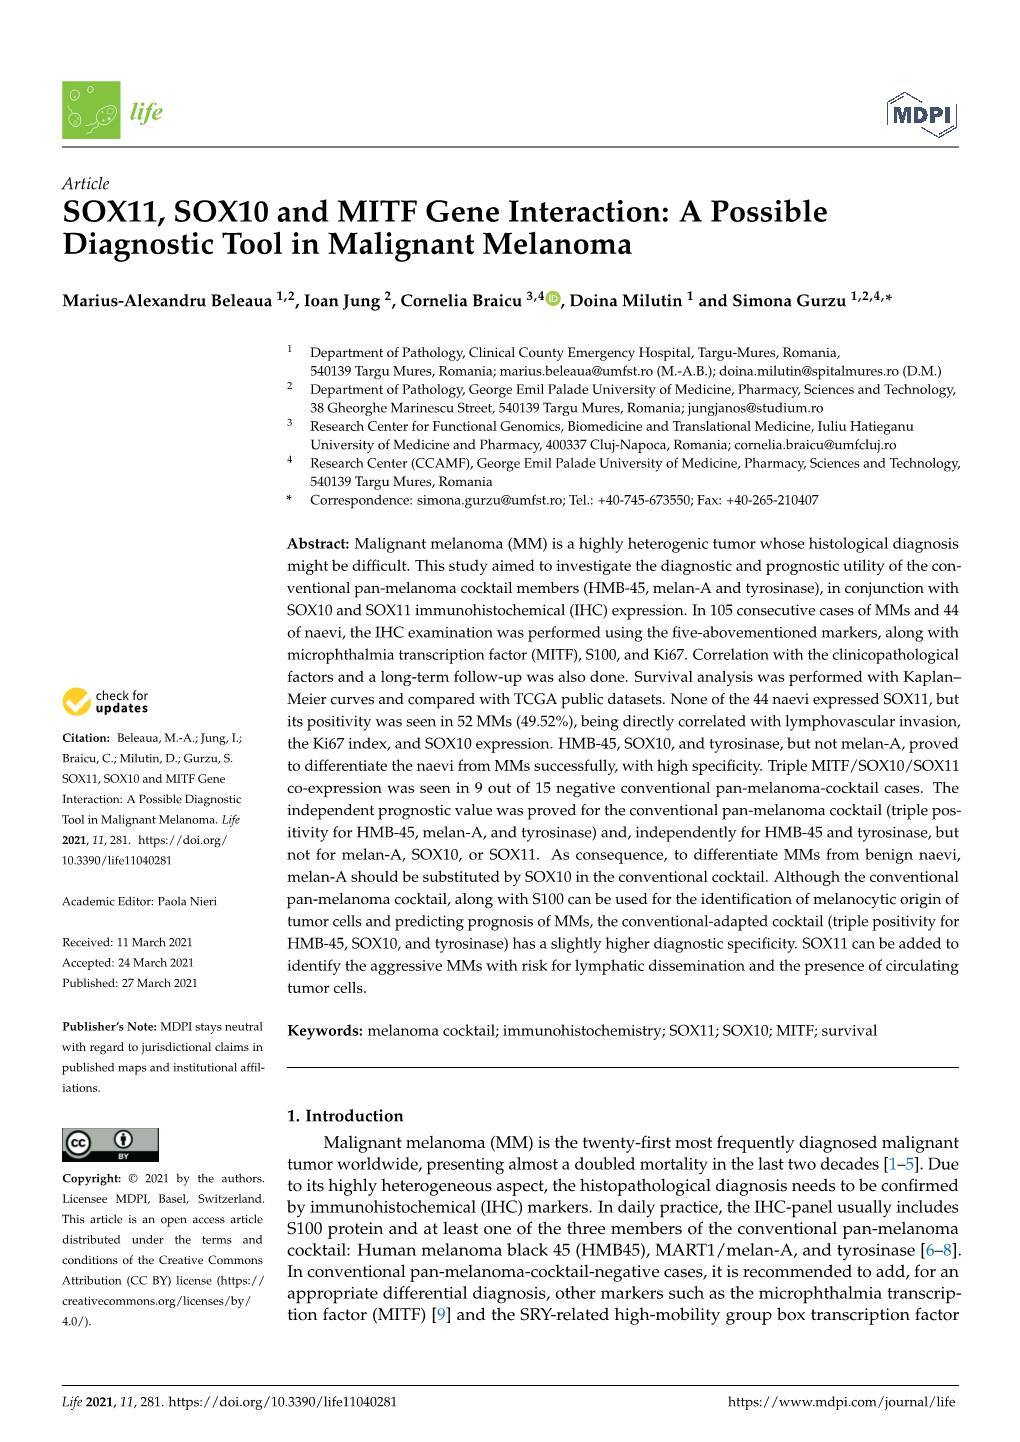 SOX11, SOX10 and MITF Gene Interaction: a Possible Diagnostic Tool in Malignant Melanoma